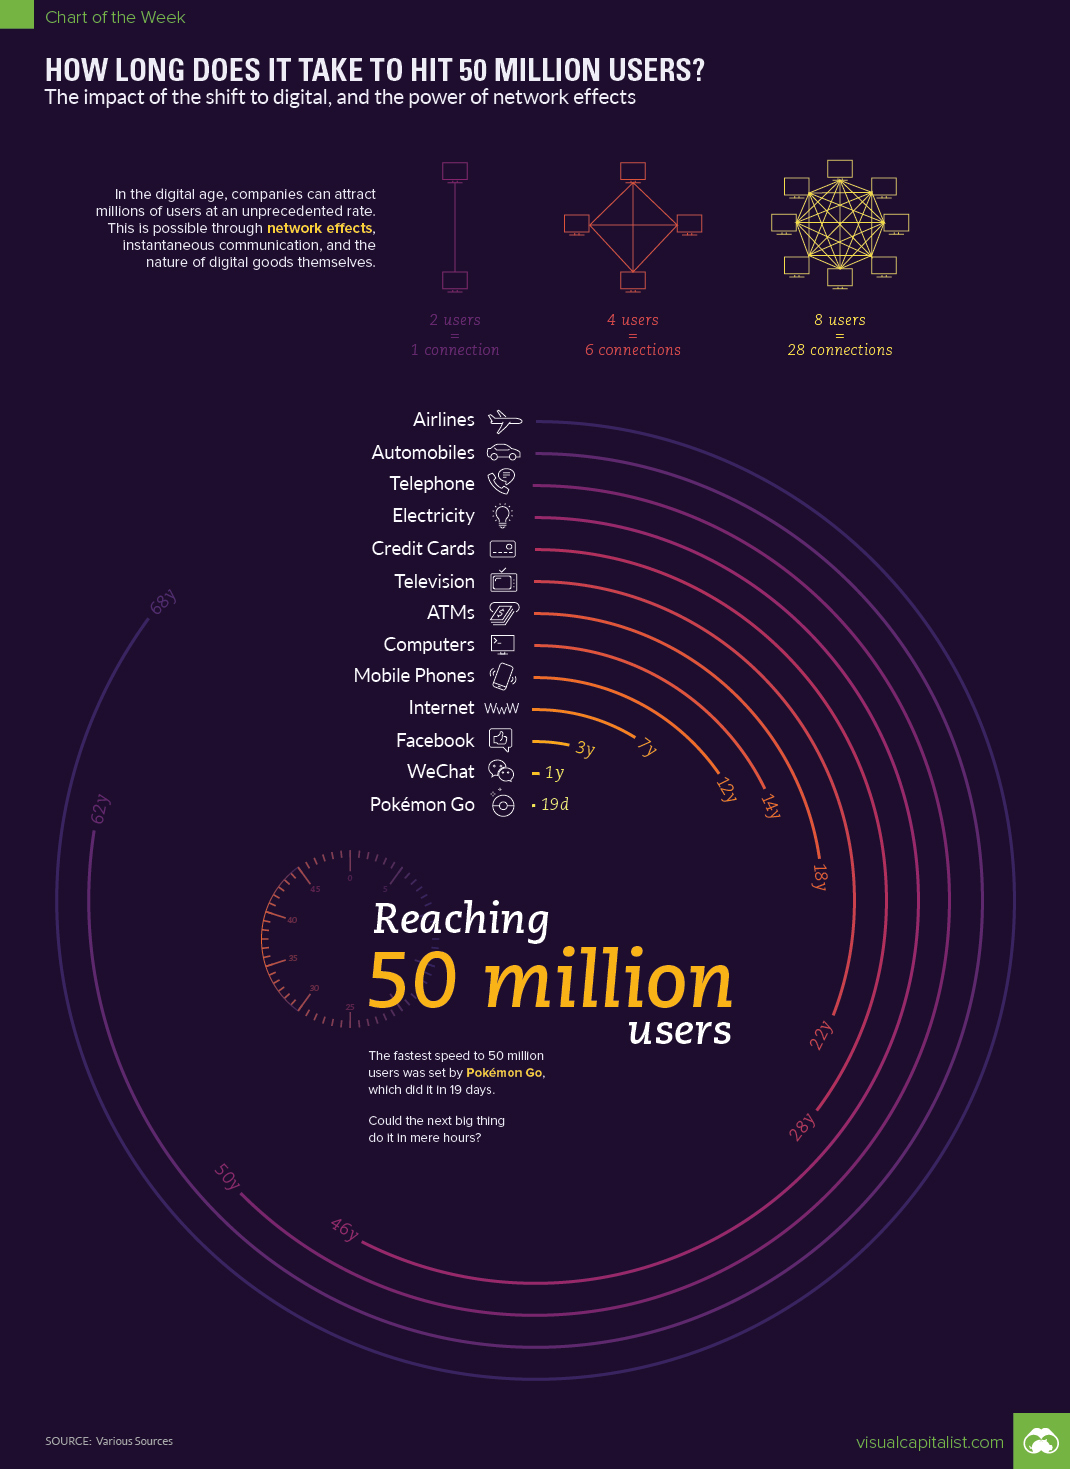 How Long Does It Take to Hit 50 Million Users? (Source: Visual Capitalist)